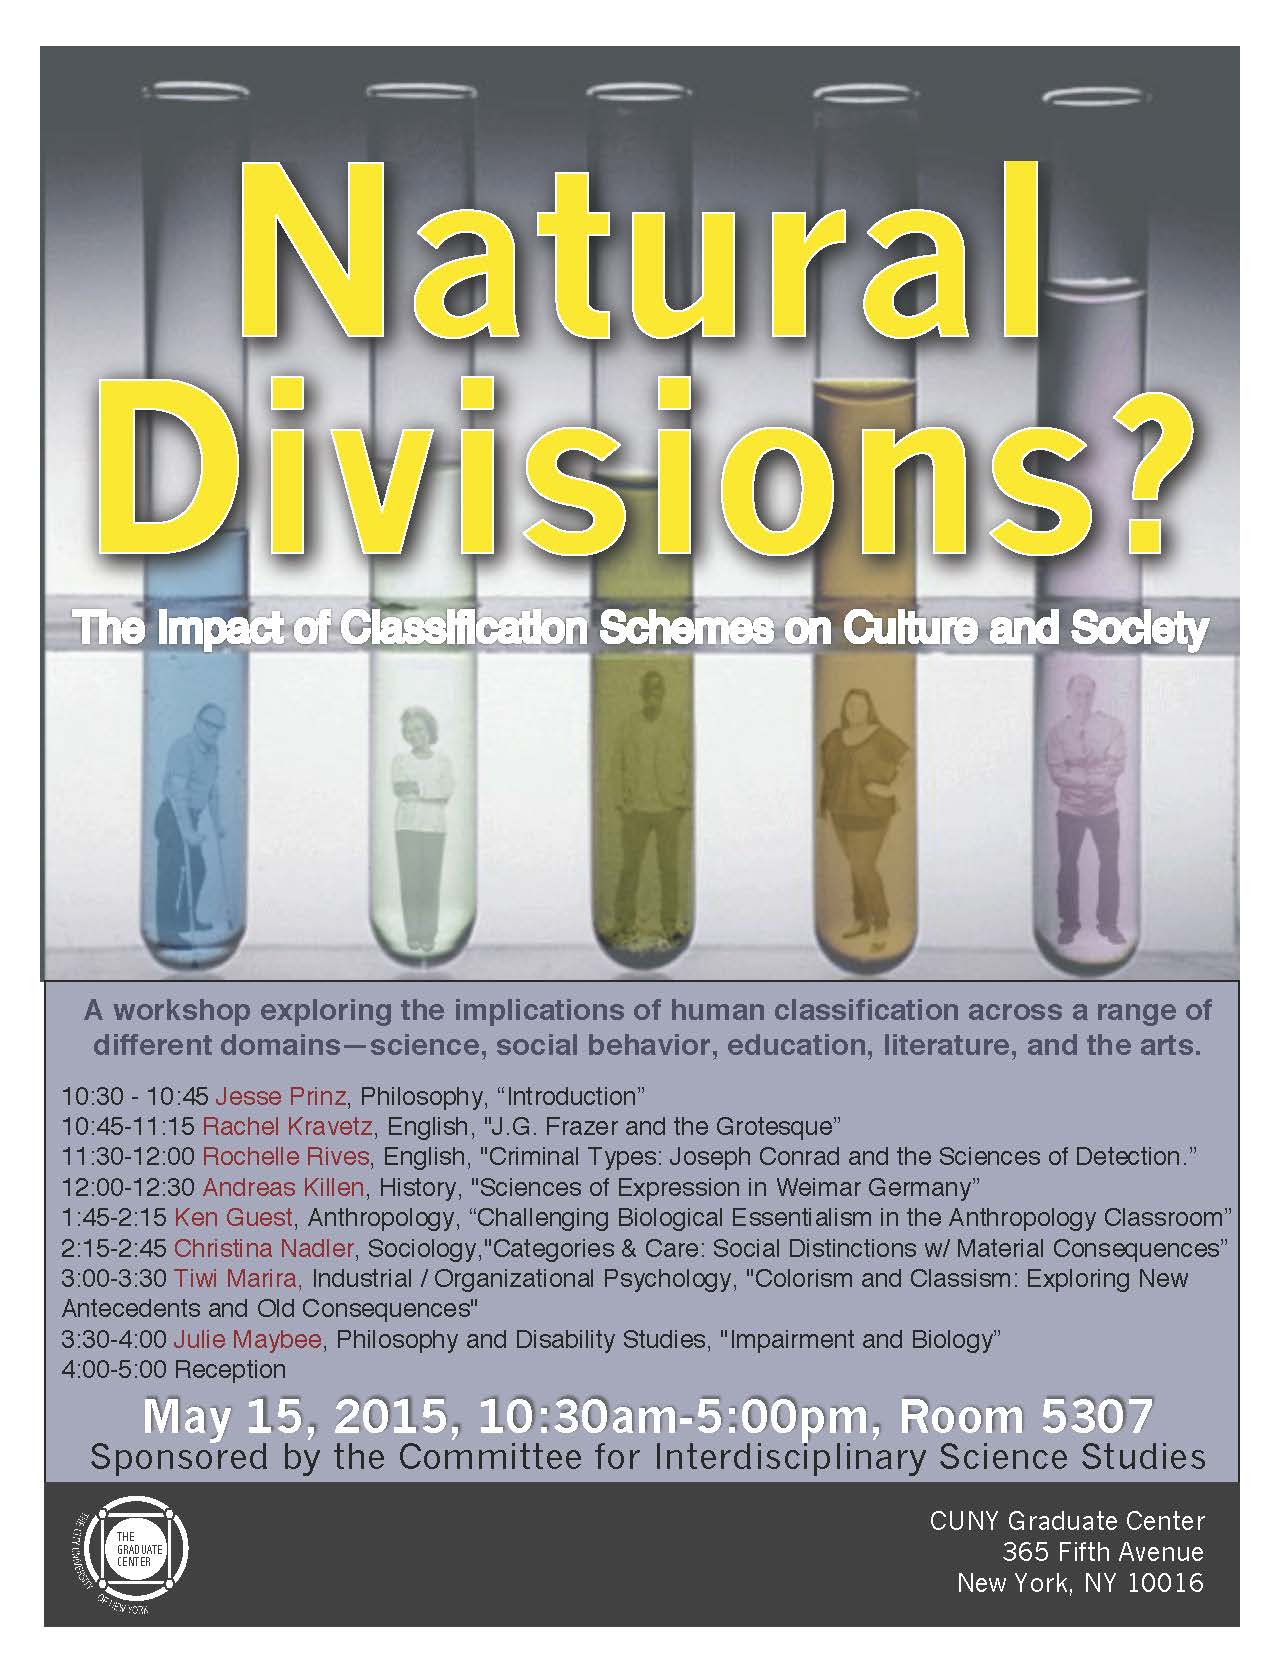 Friday, May 15th – Natural Divisions? The Impact of Classification Schemes on Culture and Society: workshop